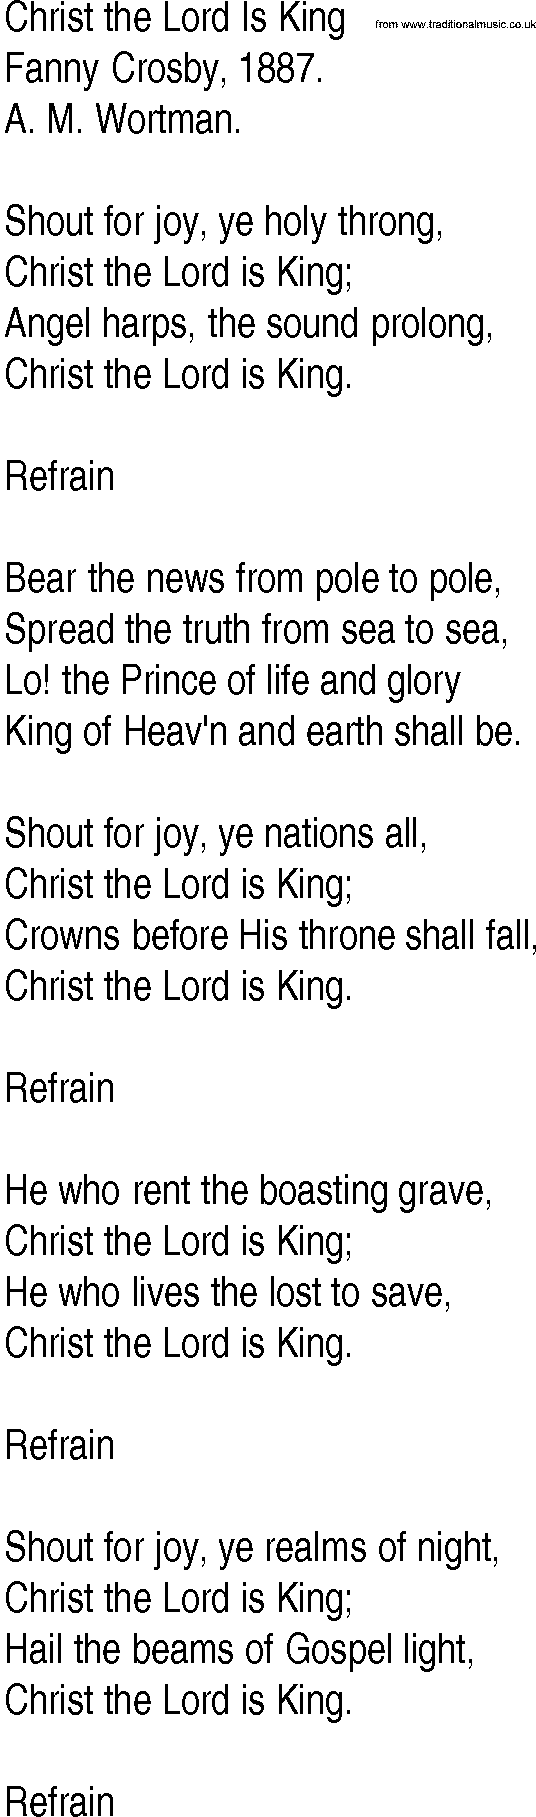 Hymn and Gospel Song: Christ the Lord Is King by Fanny Crosby lyrics